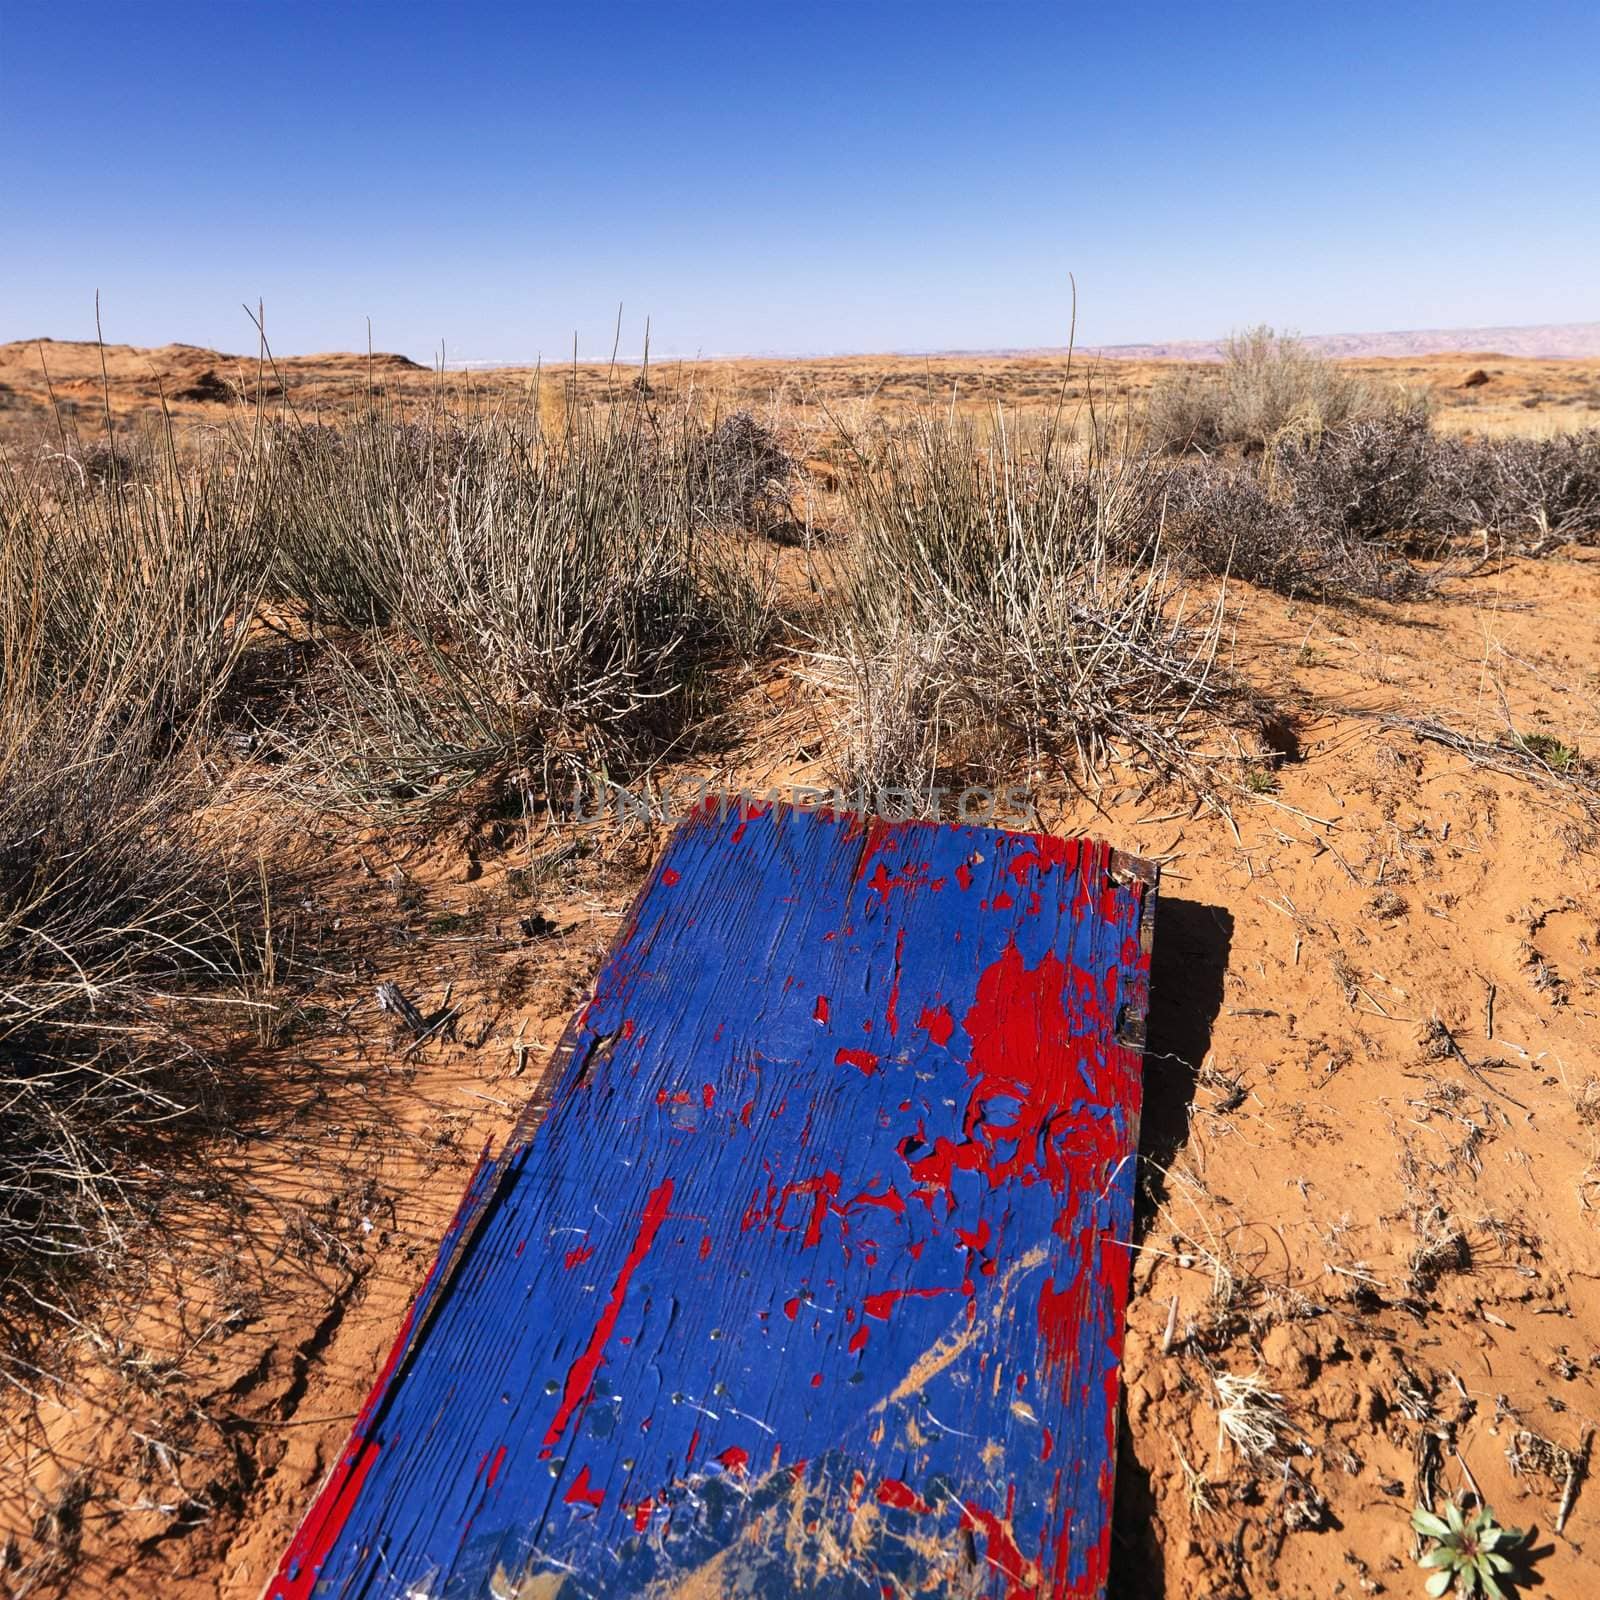 Landscape of Arizona desert with peeling wooden plank in foreground.